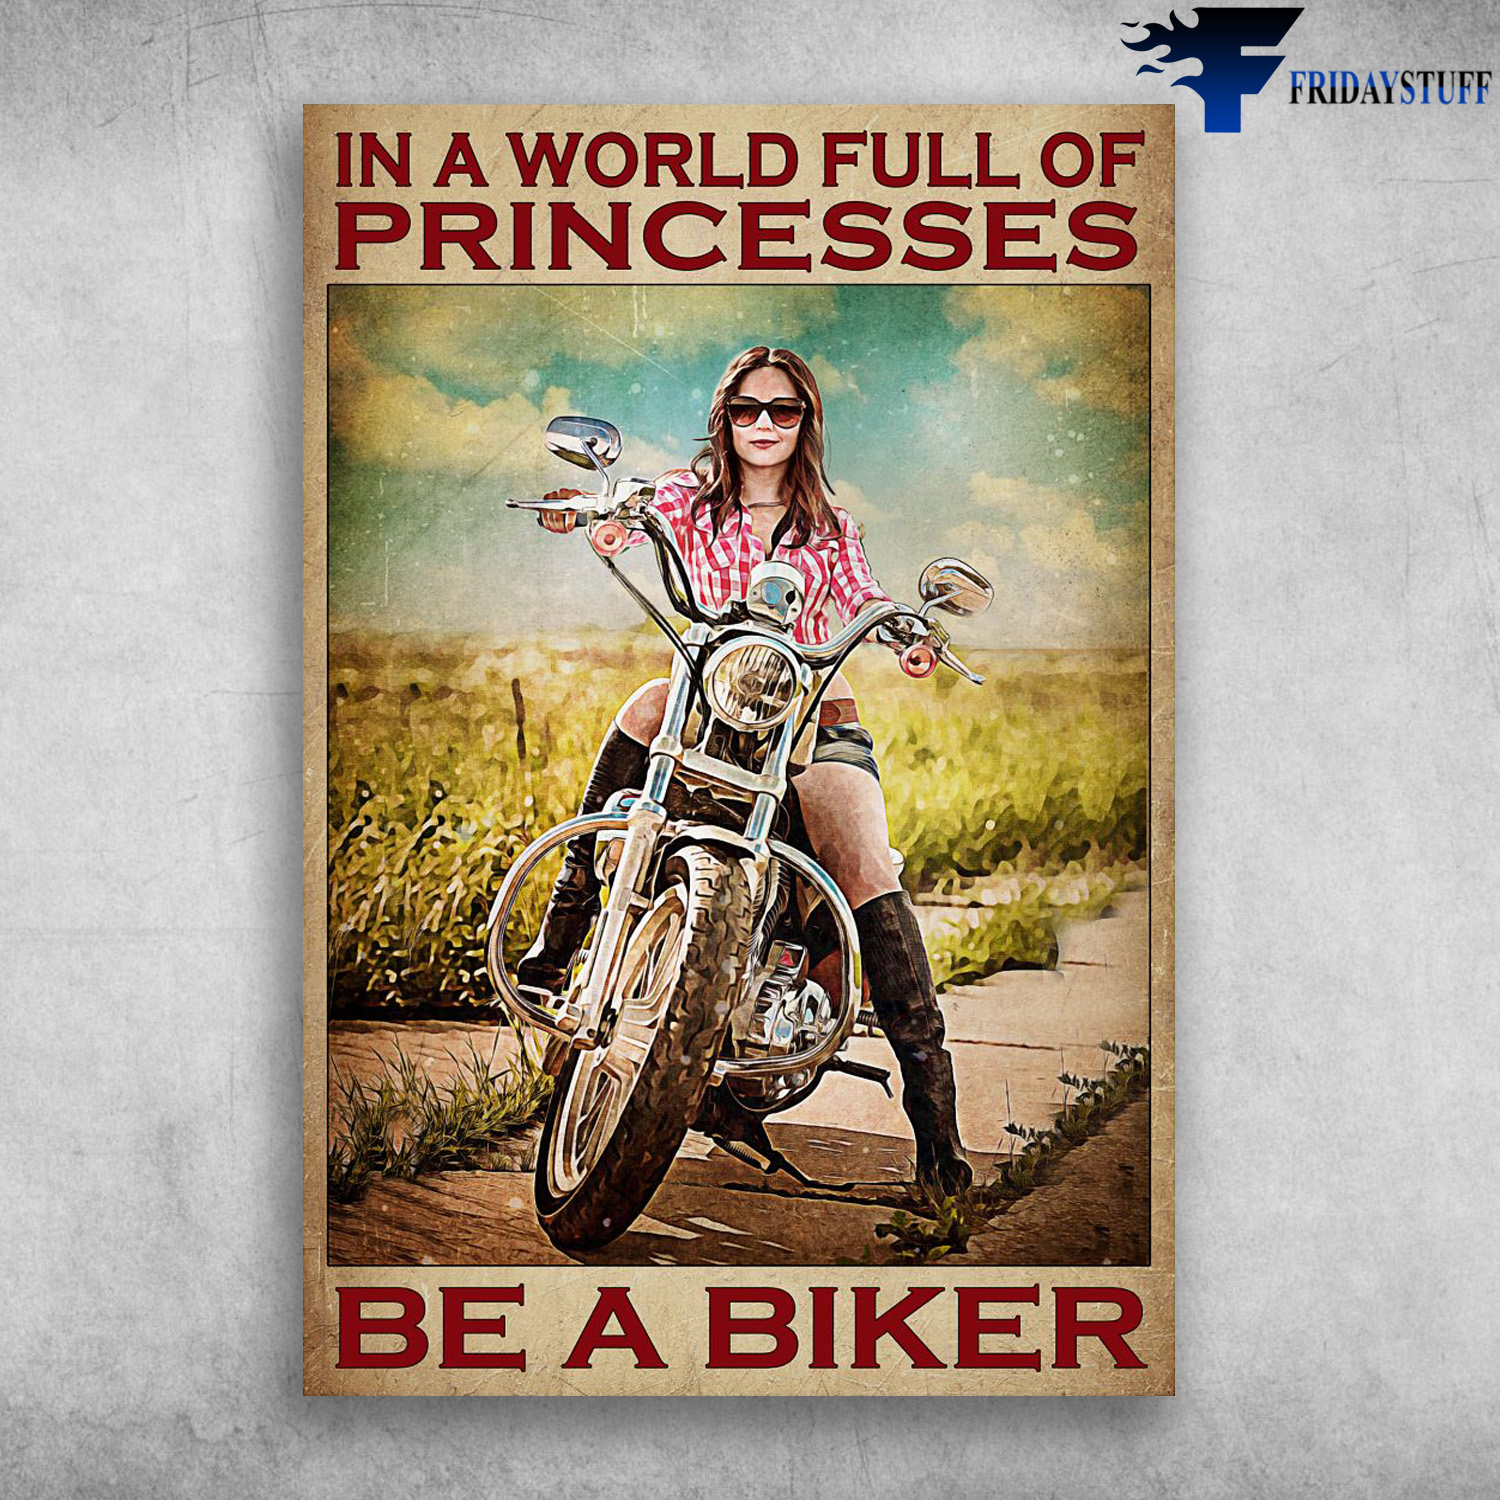 Lady Motocycle - In World Full Of Princesses, Be A Biker